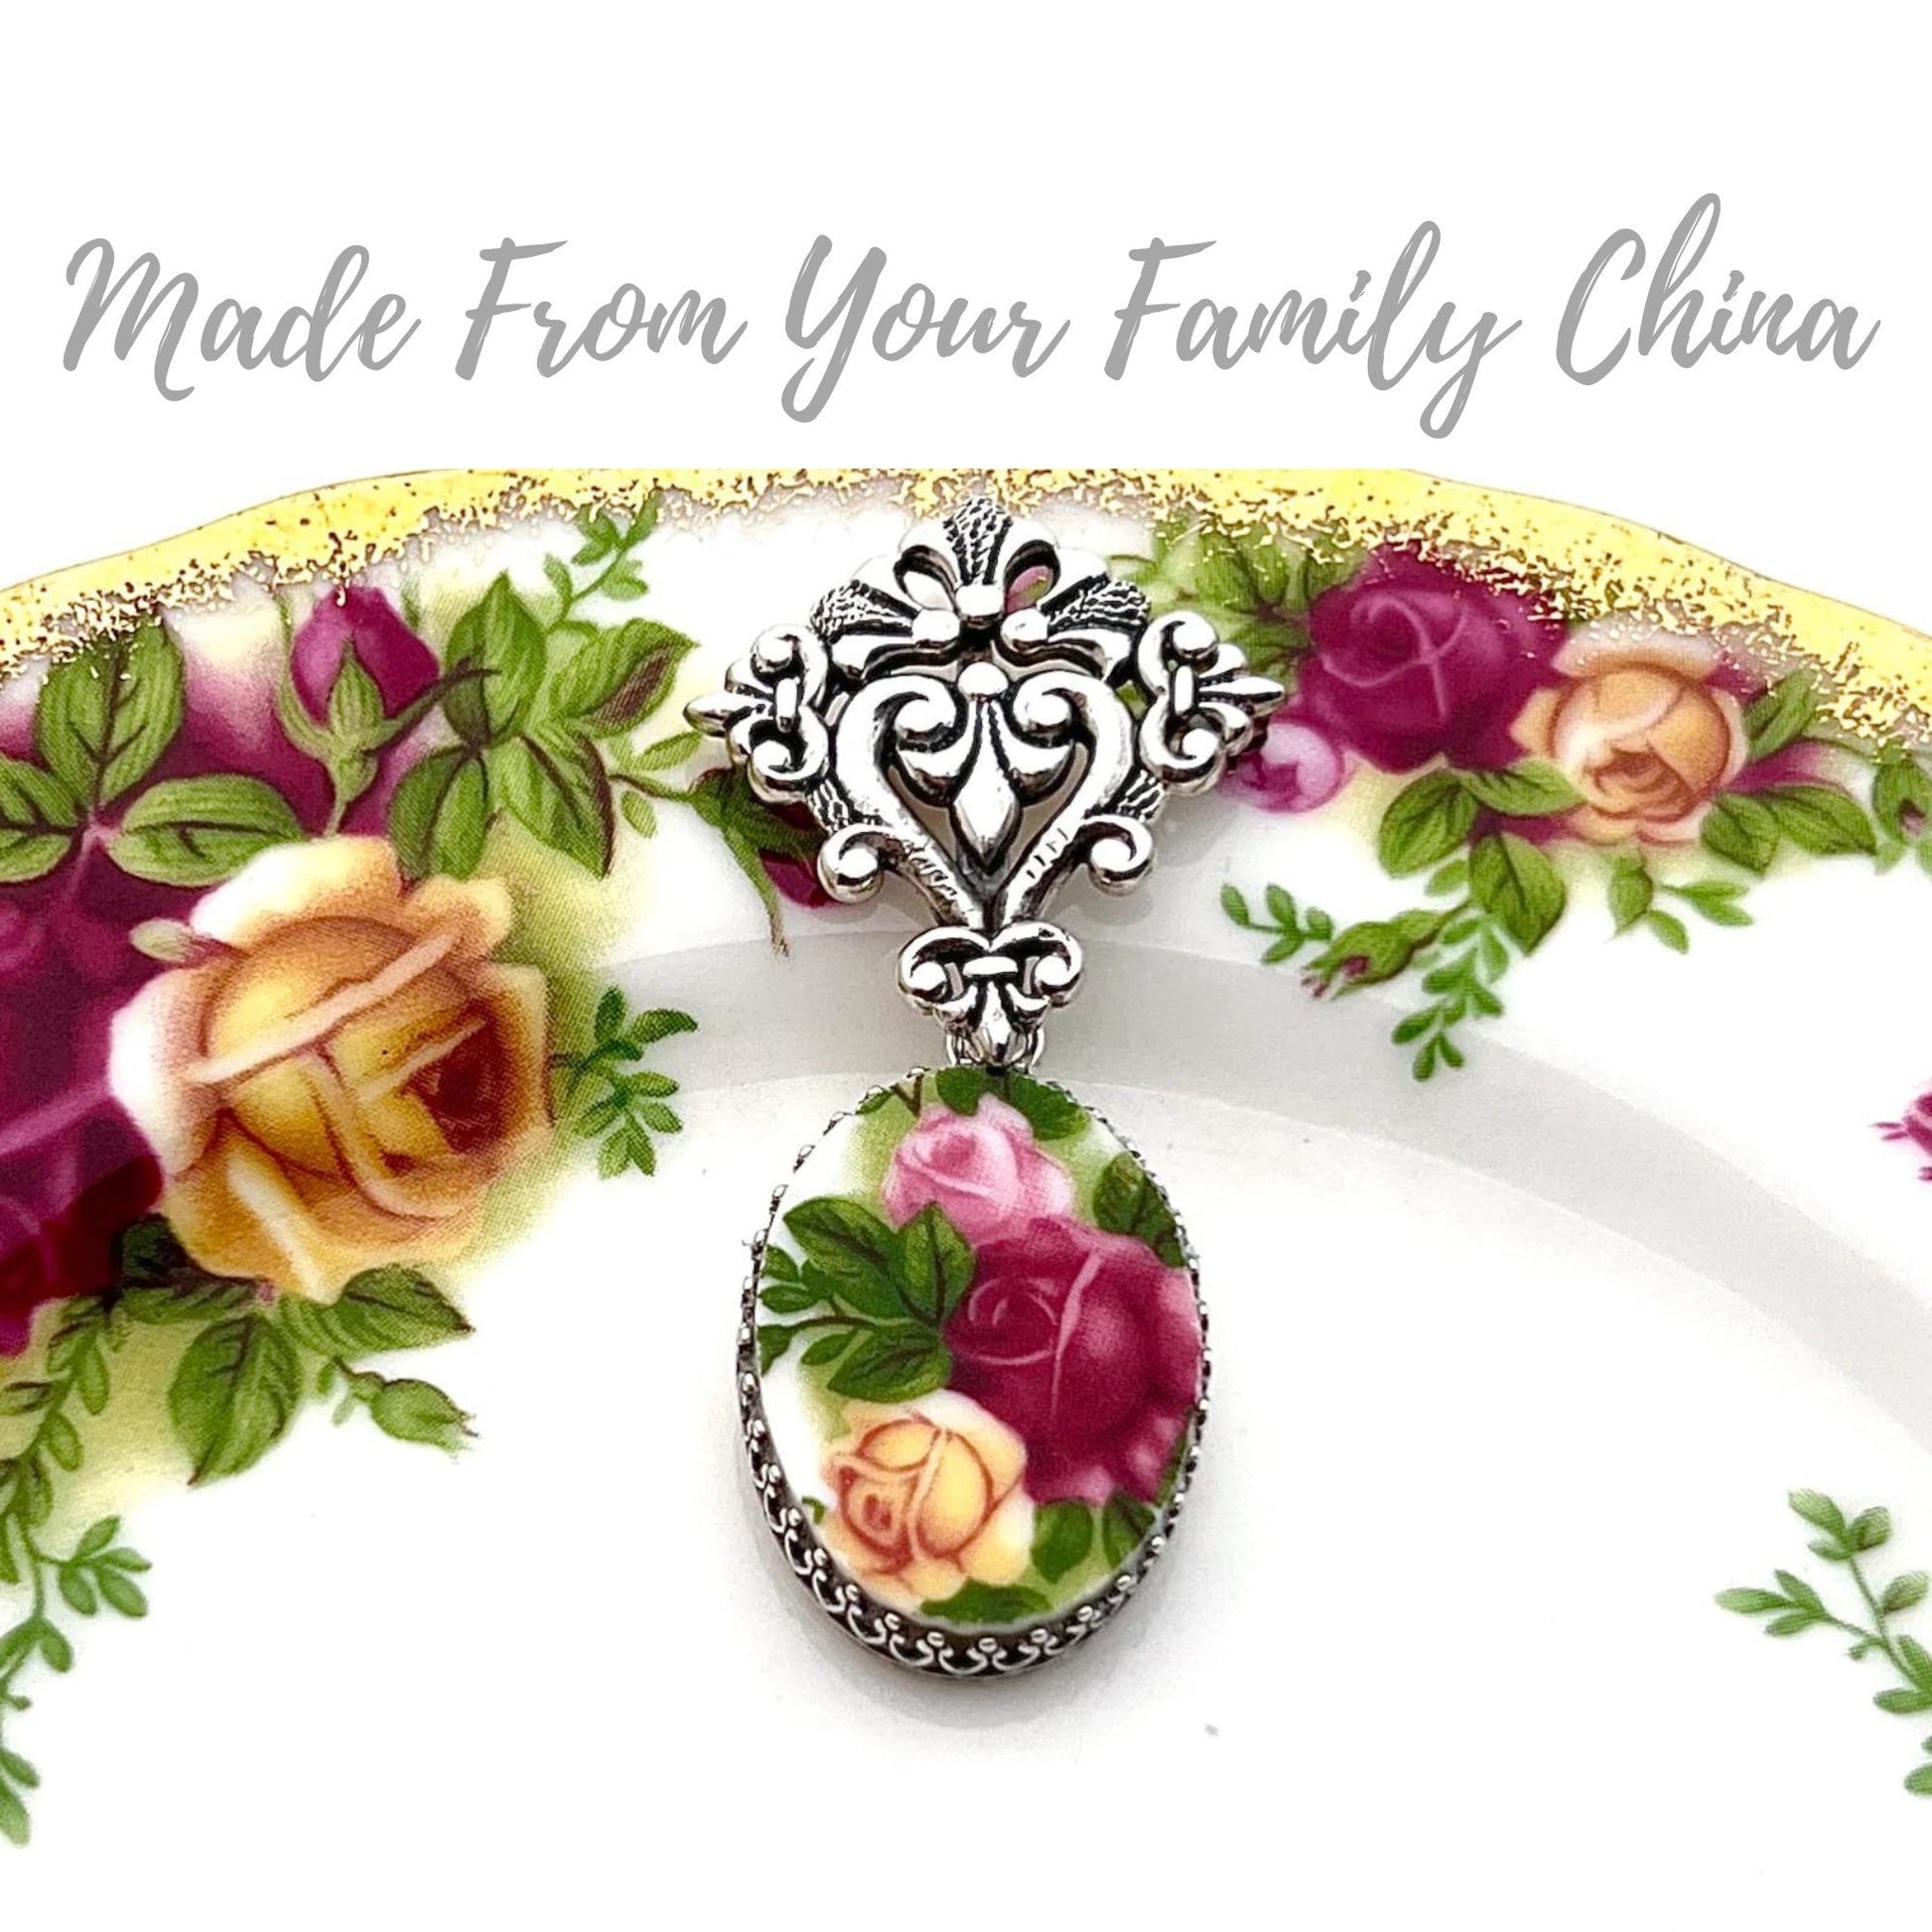 CUSTOM ORDER Fleur De Lis Floral Brooch, Victorian Jewelry, Broken China Jewelry, Family Mom Gift, Made From Your China, Custom Jewelry